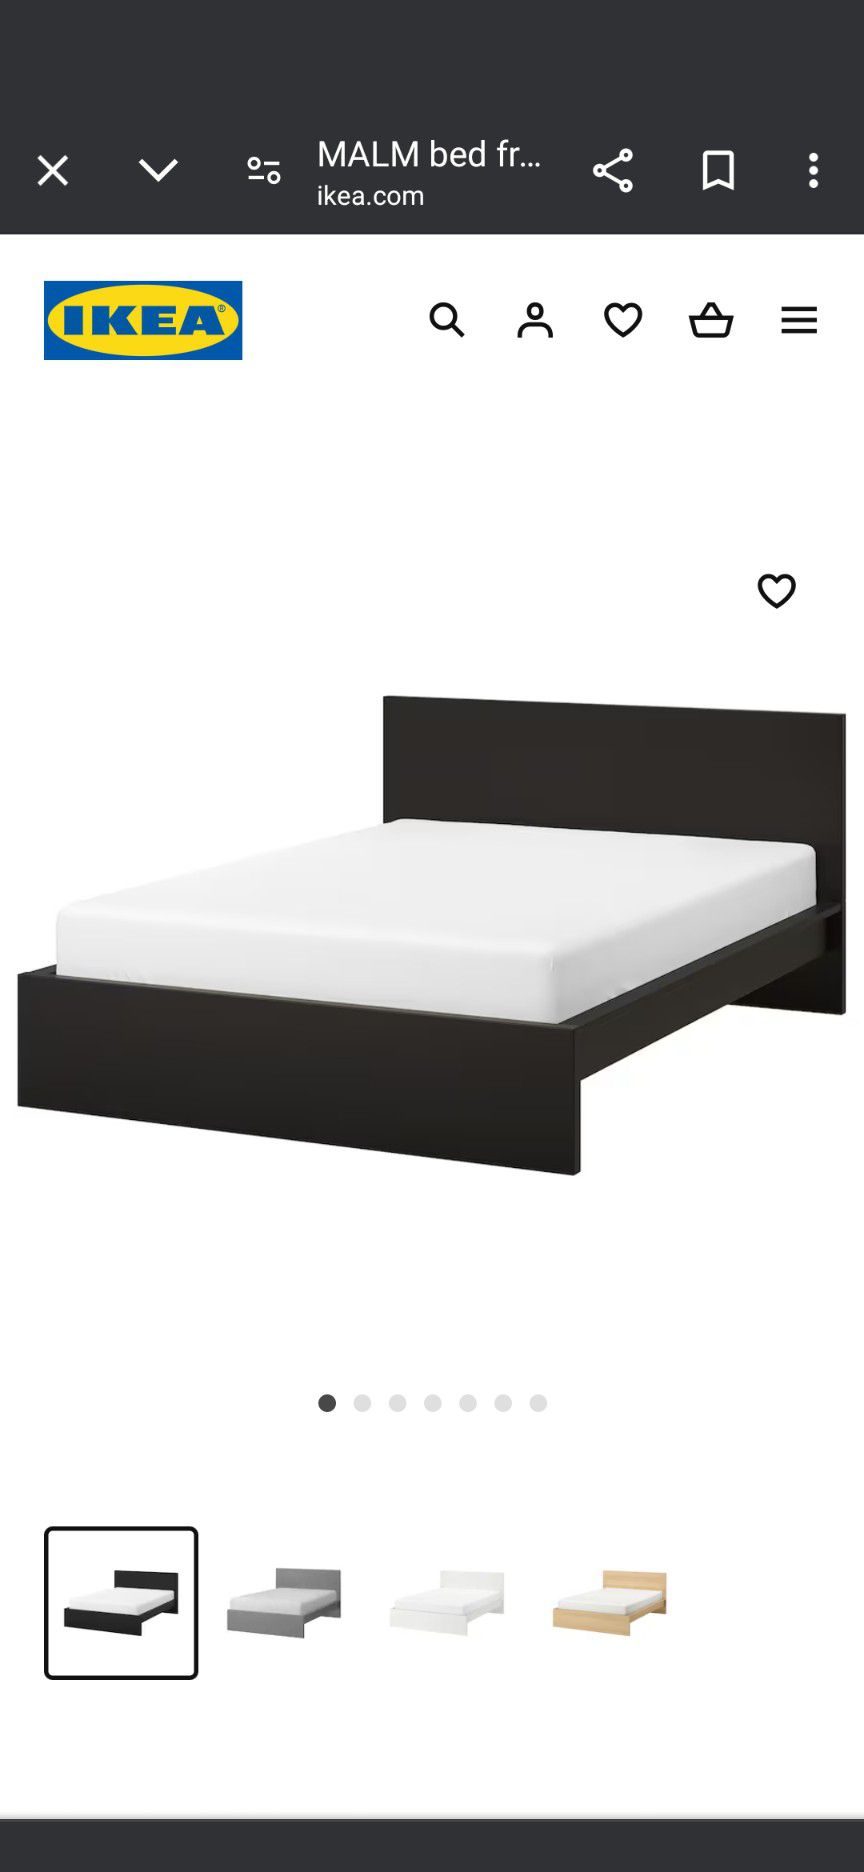 IKEA Malm Queen Black-Brown Bed Frame